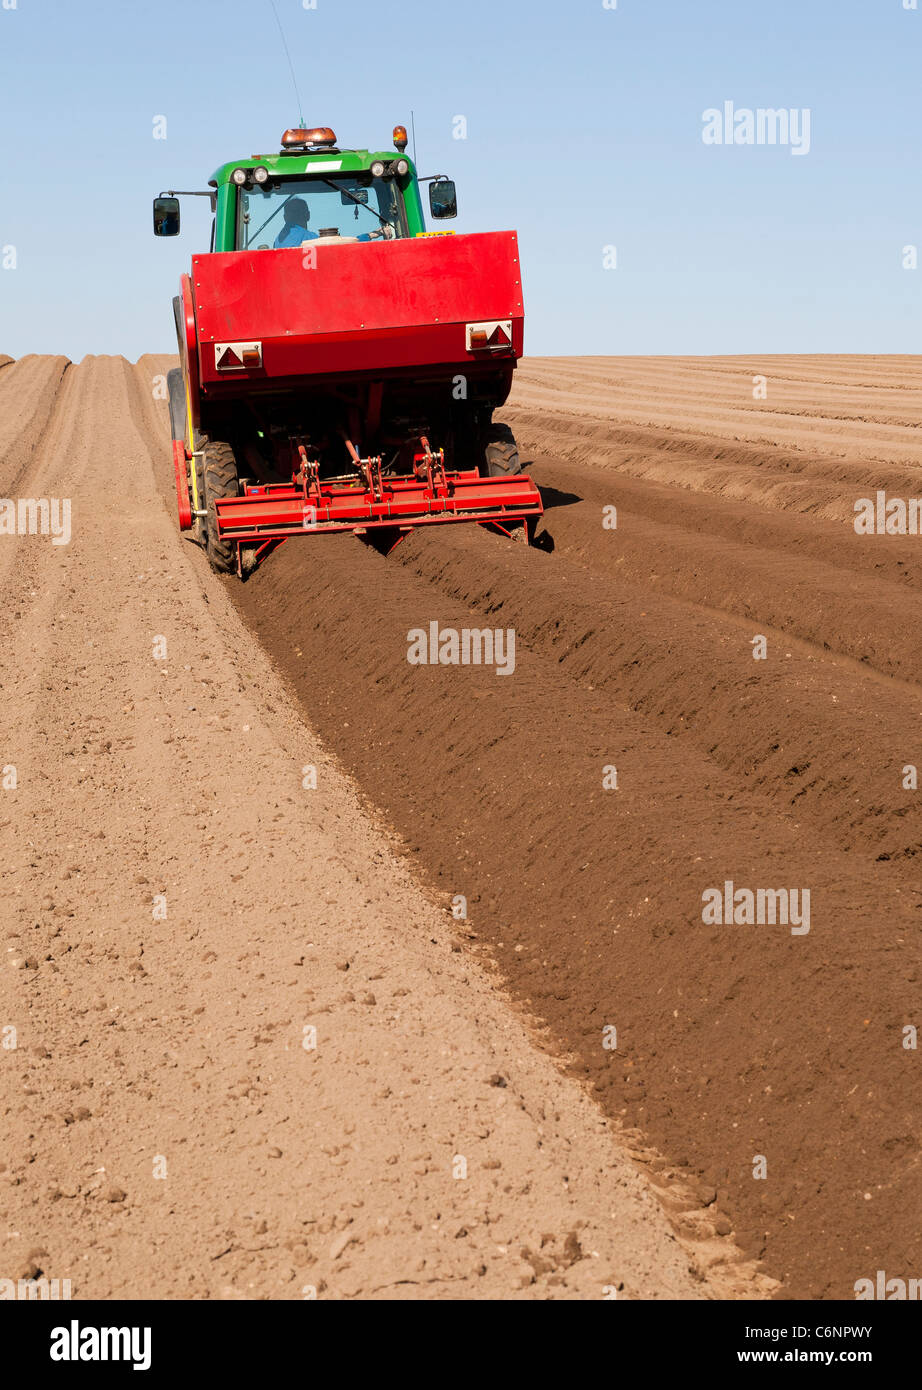 An agricultural tractor with a potato planter fitted planting potatoes Stock Photo